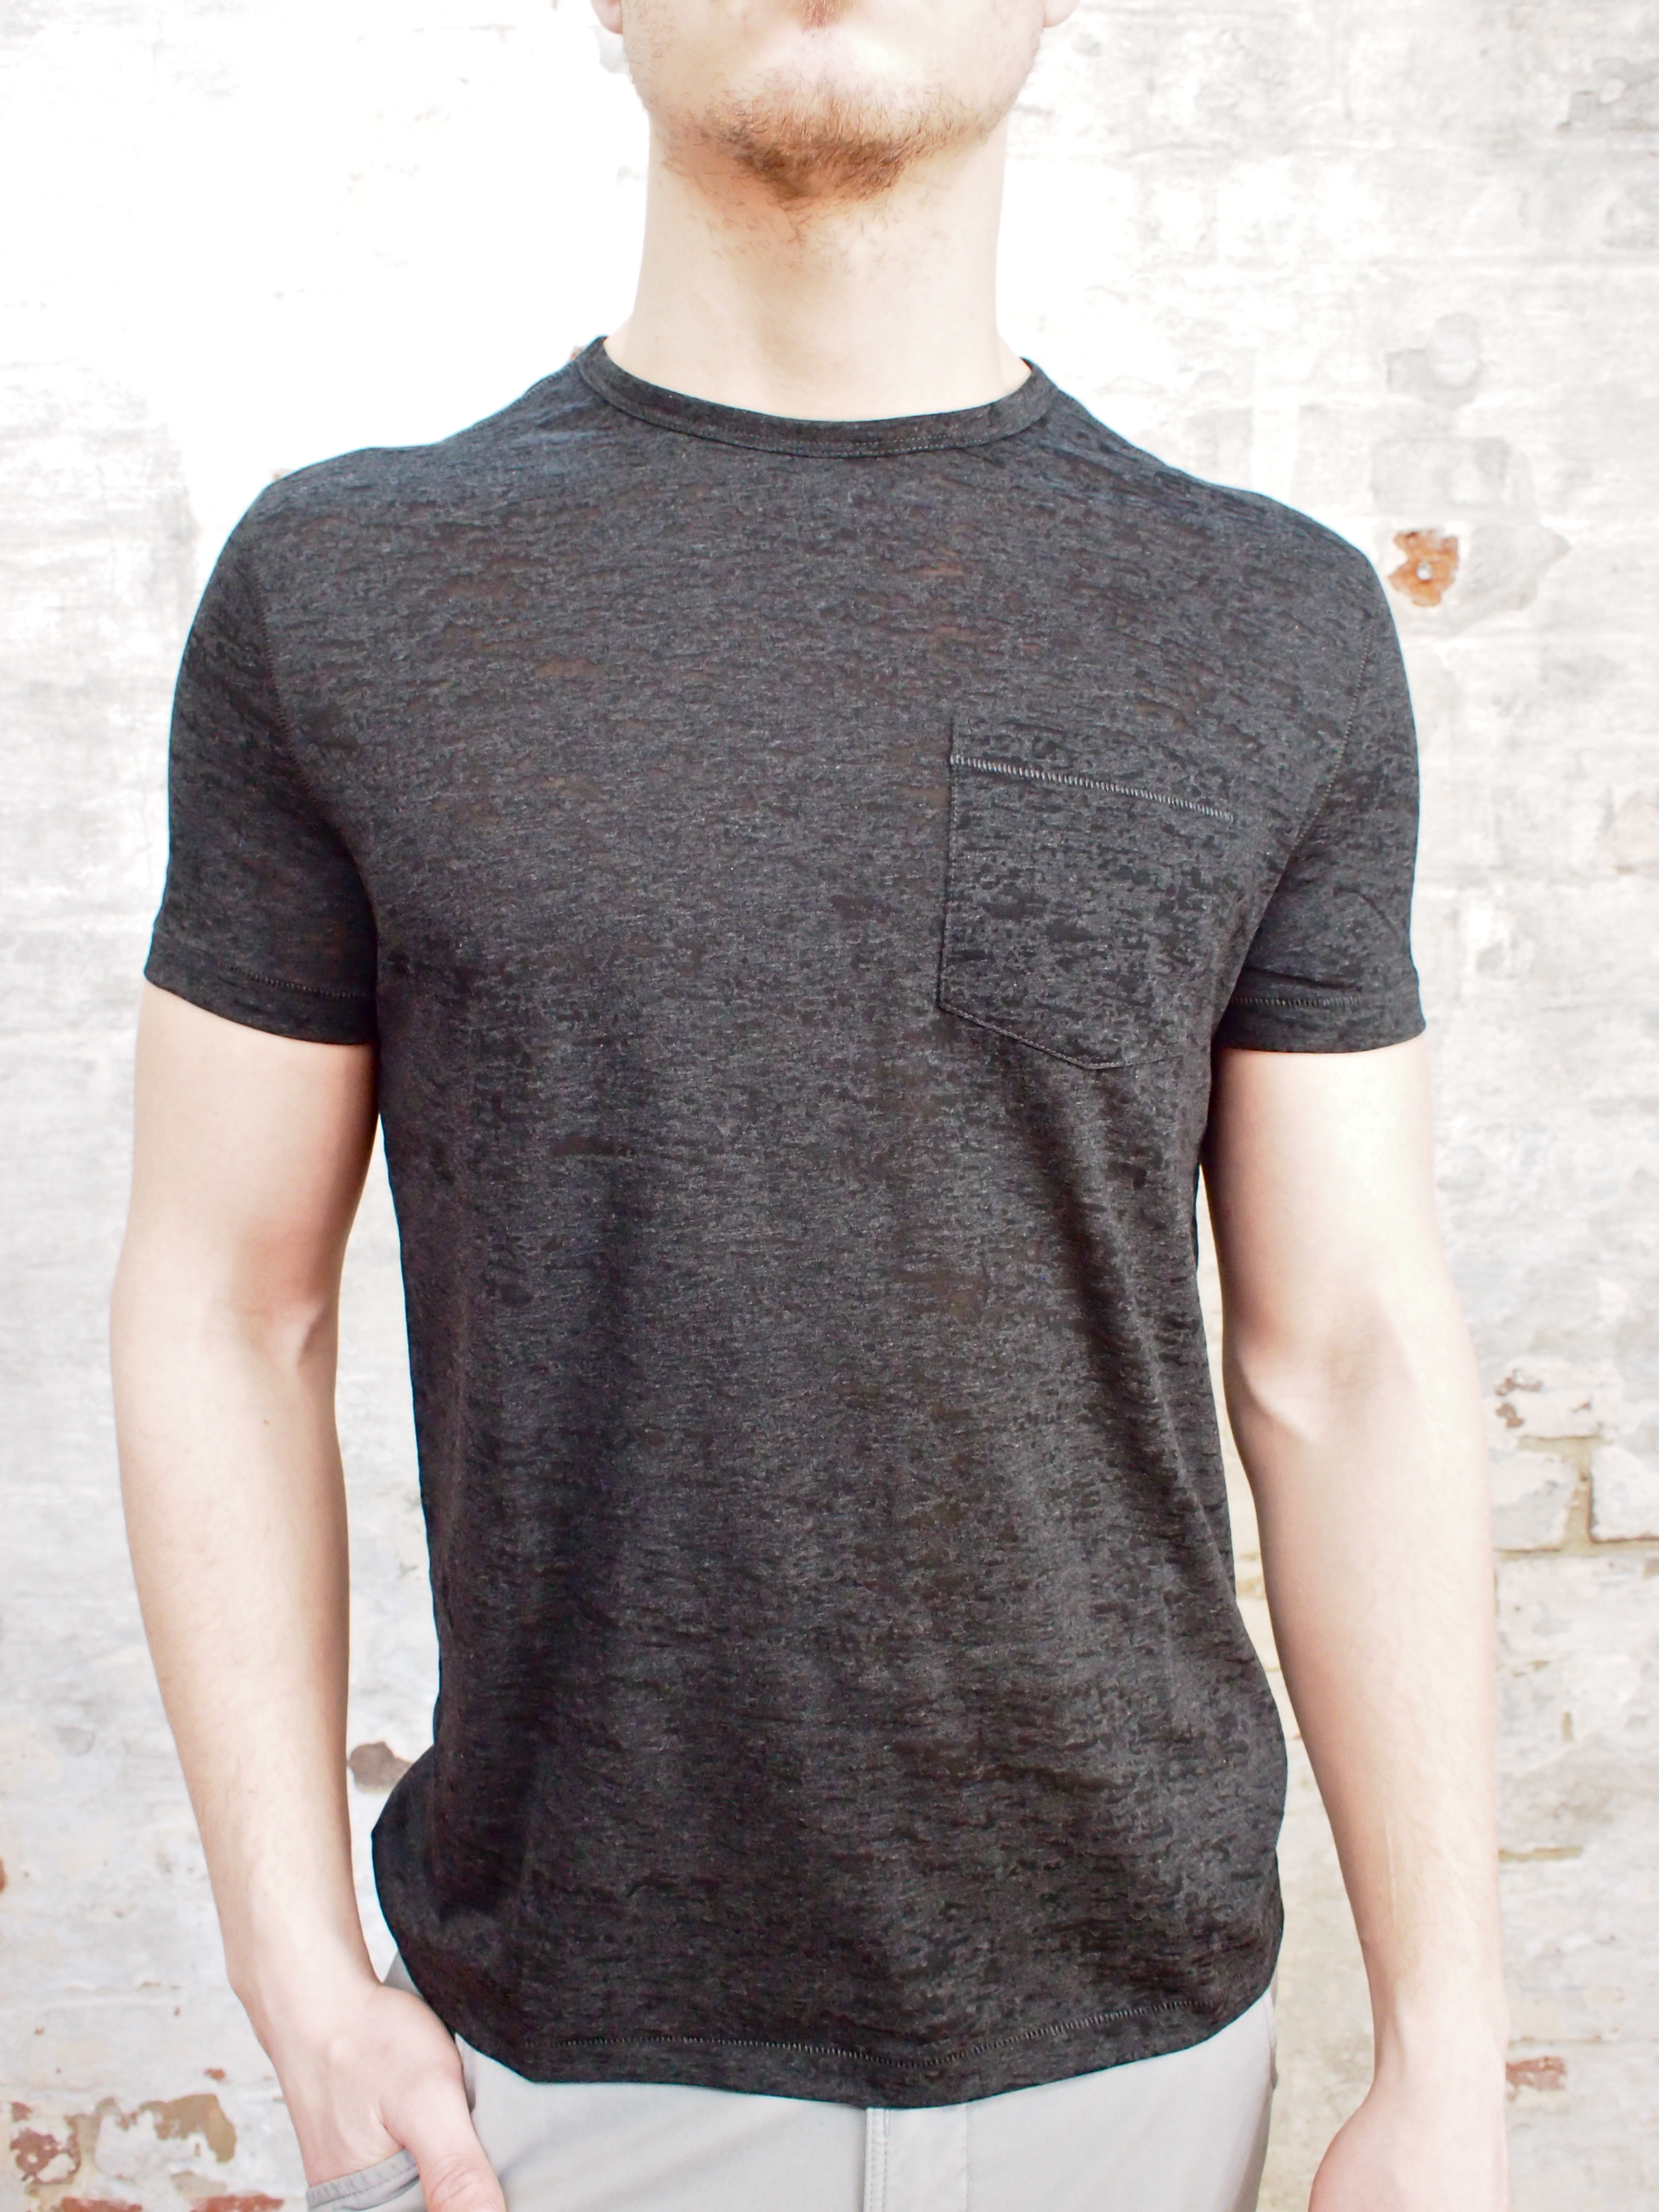 What's New: Burnout Crew Neck Tee by John Varvatos – Gotstyle